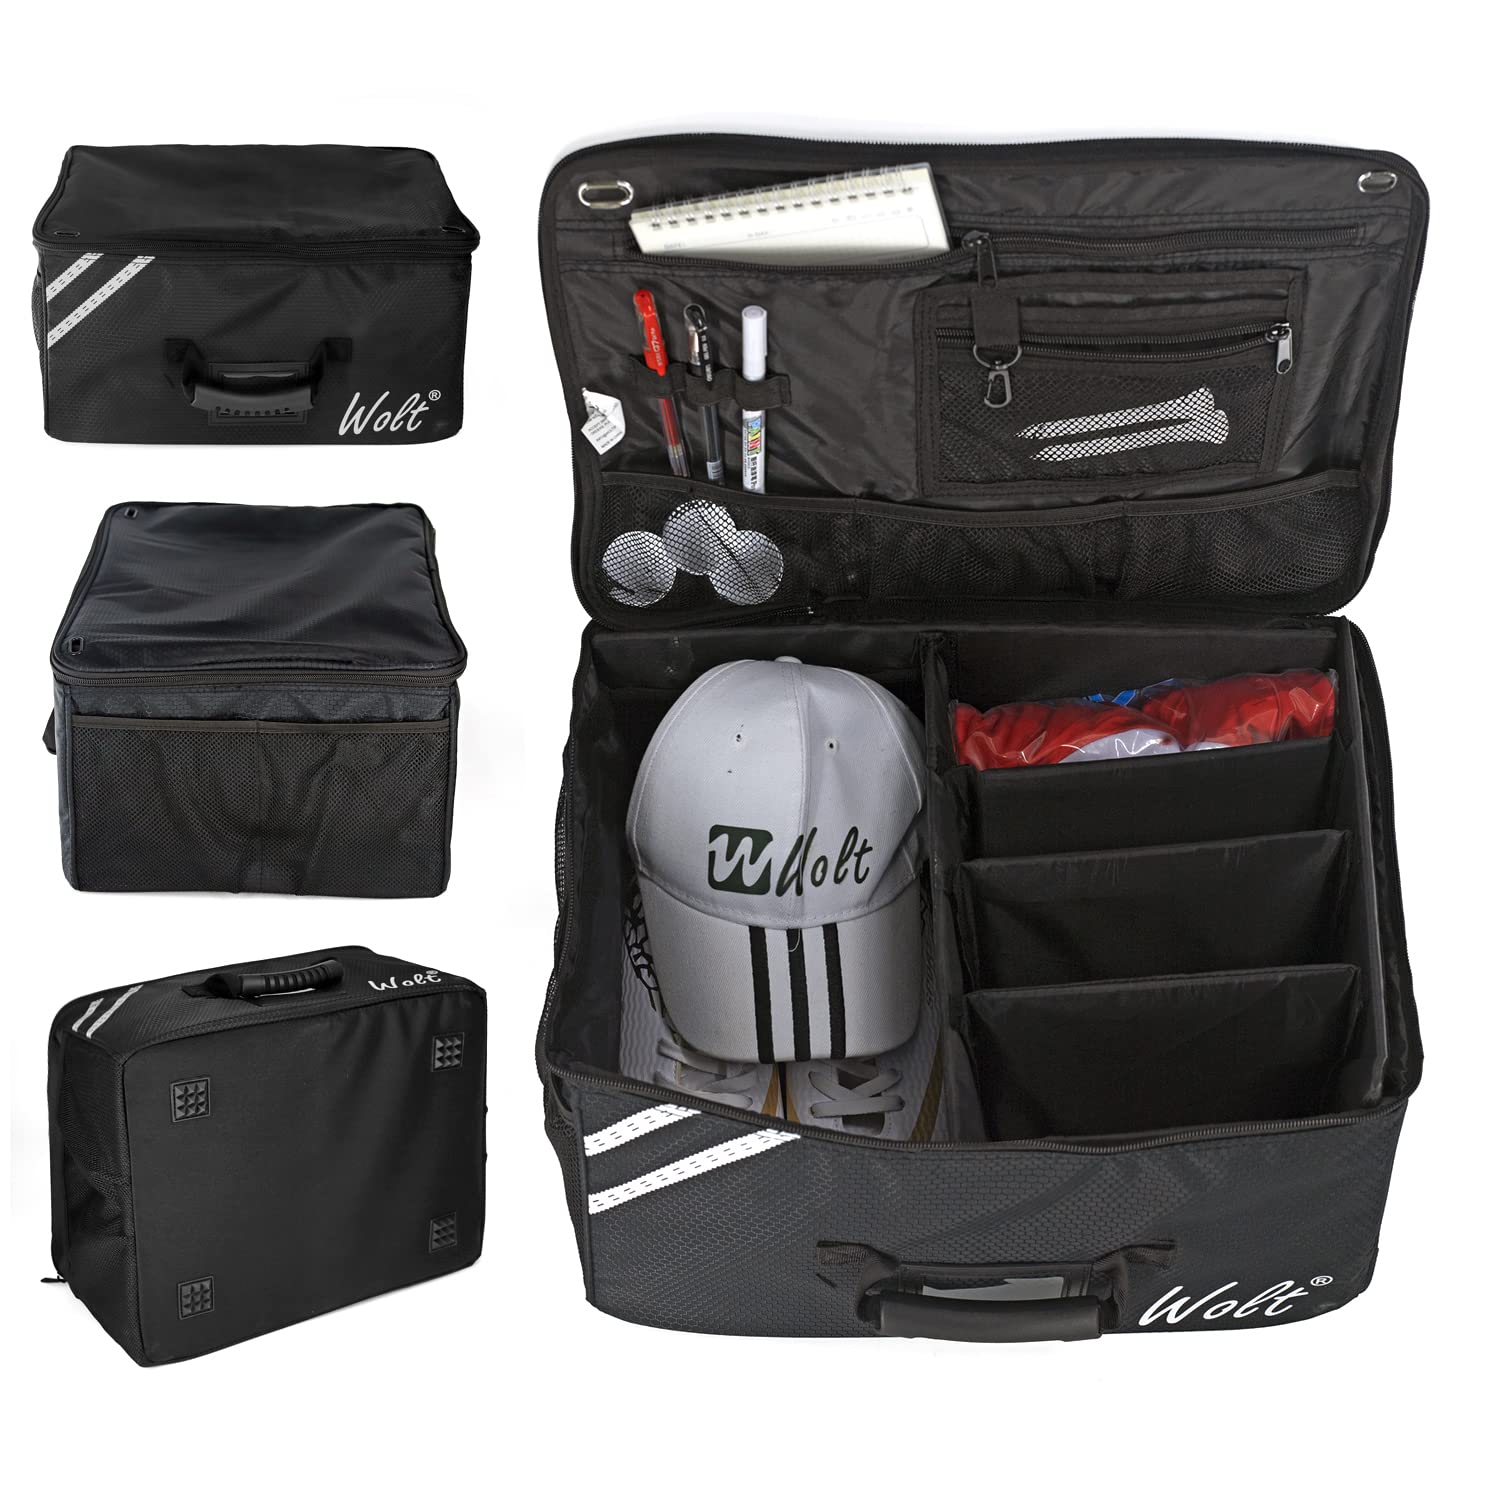 Golf Locker - apparel, shoes, accessories and more